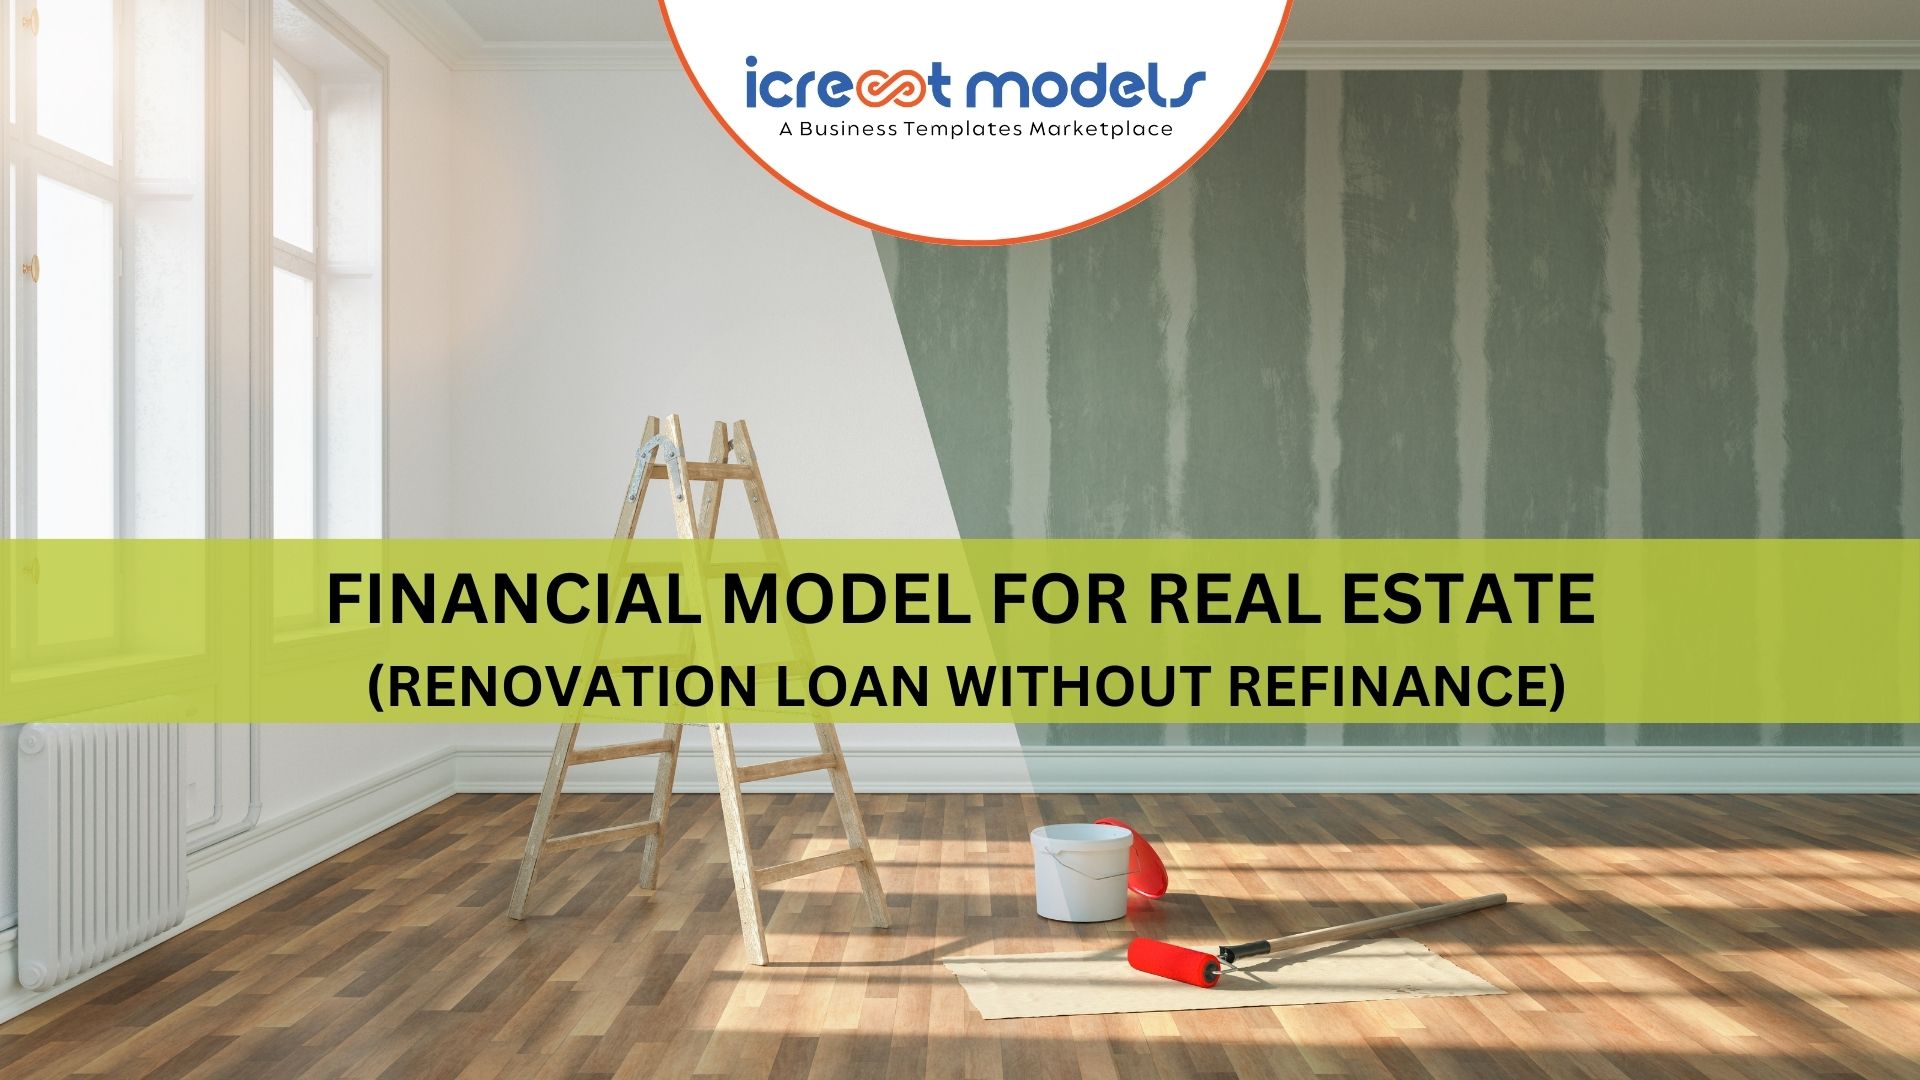 Financial Model For Real Estate (Renovation Loan Without Refinance)